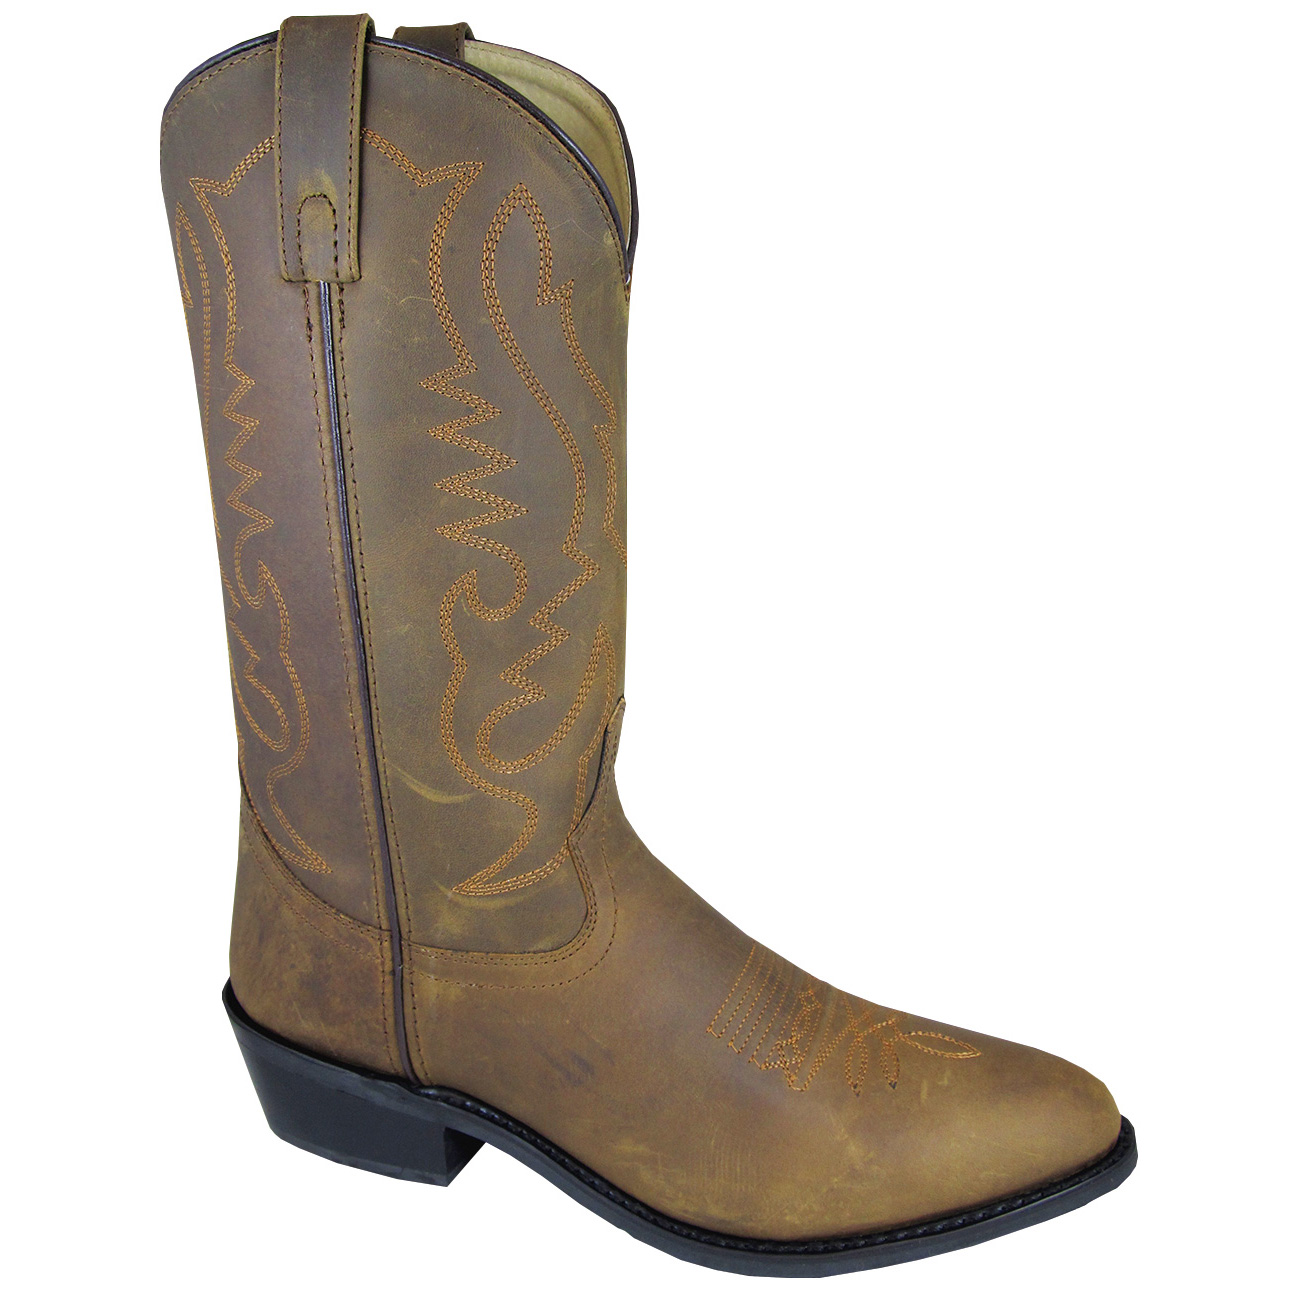 Smoky Mountain Boots Men's 4034 Denver 12" Oiled Leather Cowboy Boot Wide Width Available - Brown Distress